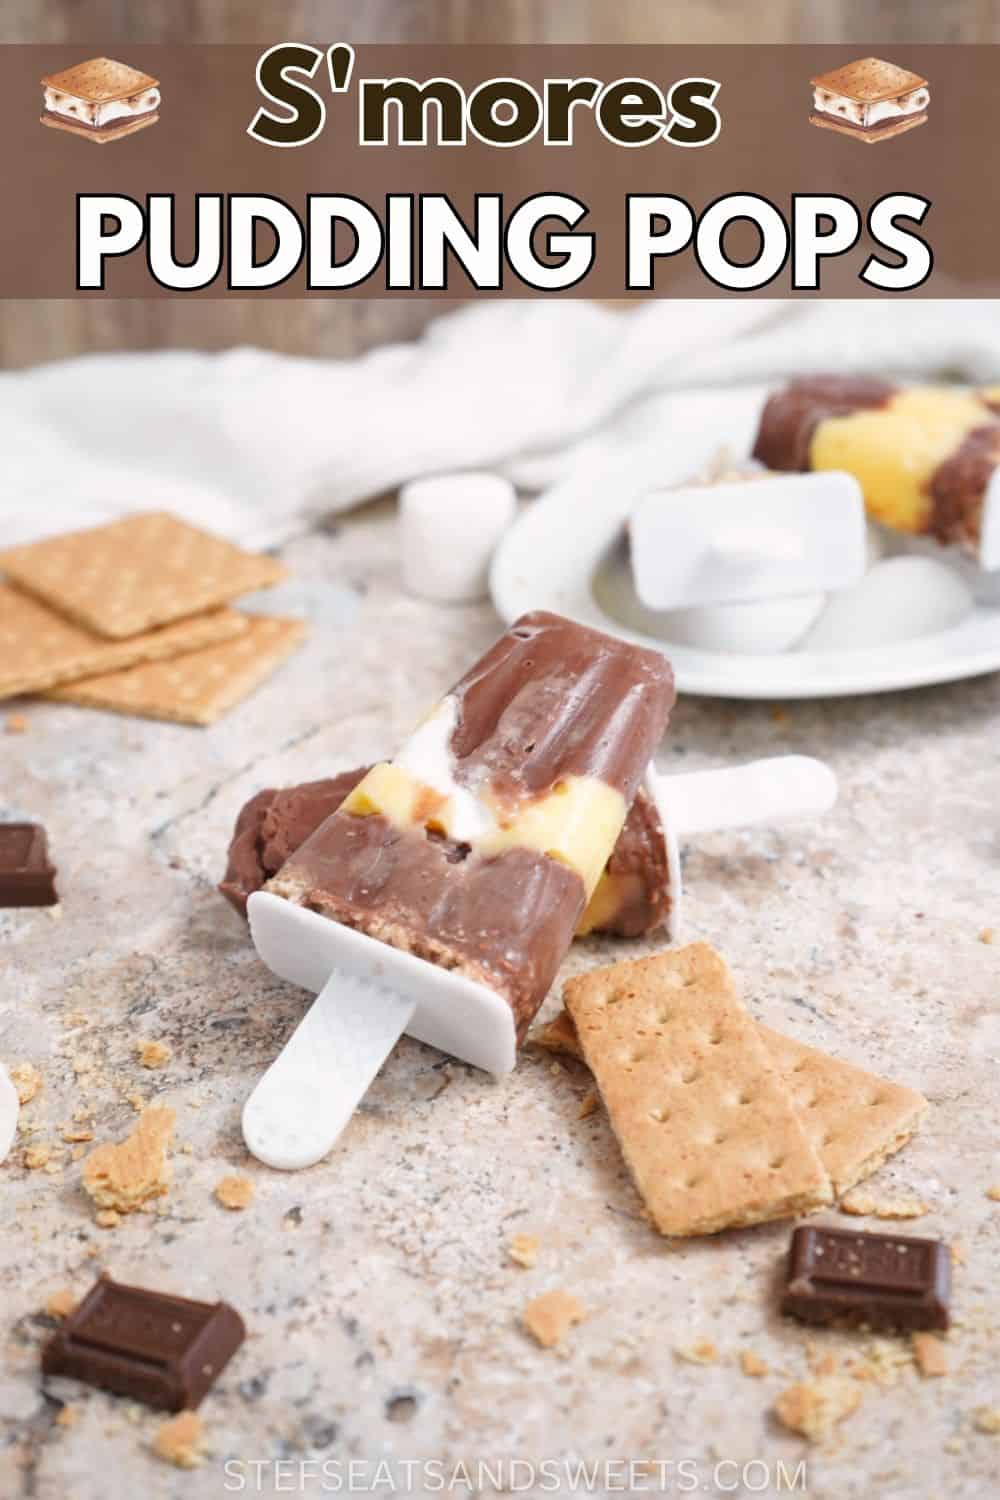 pudding pops image with text 